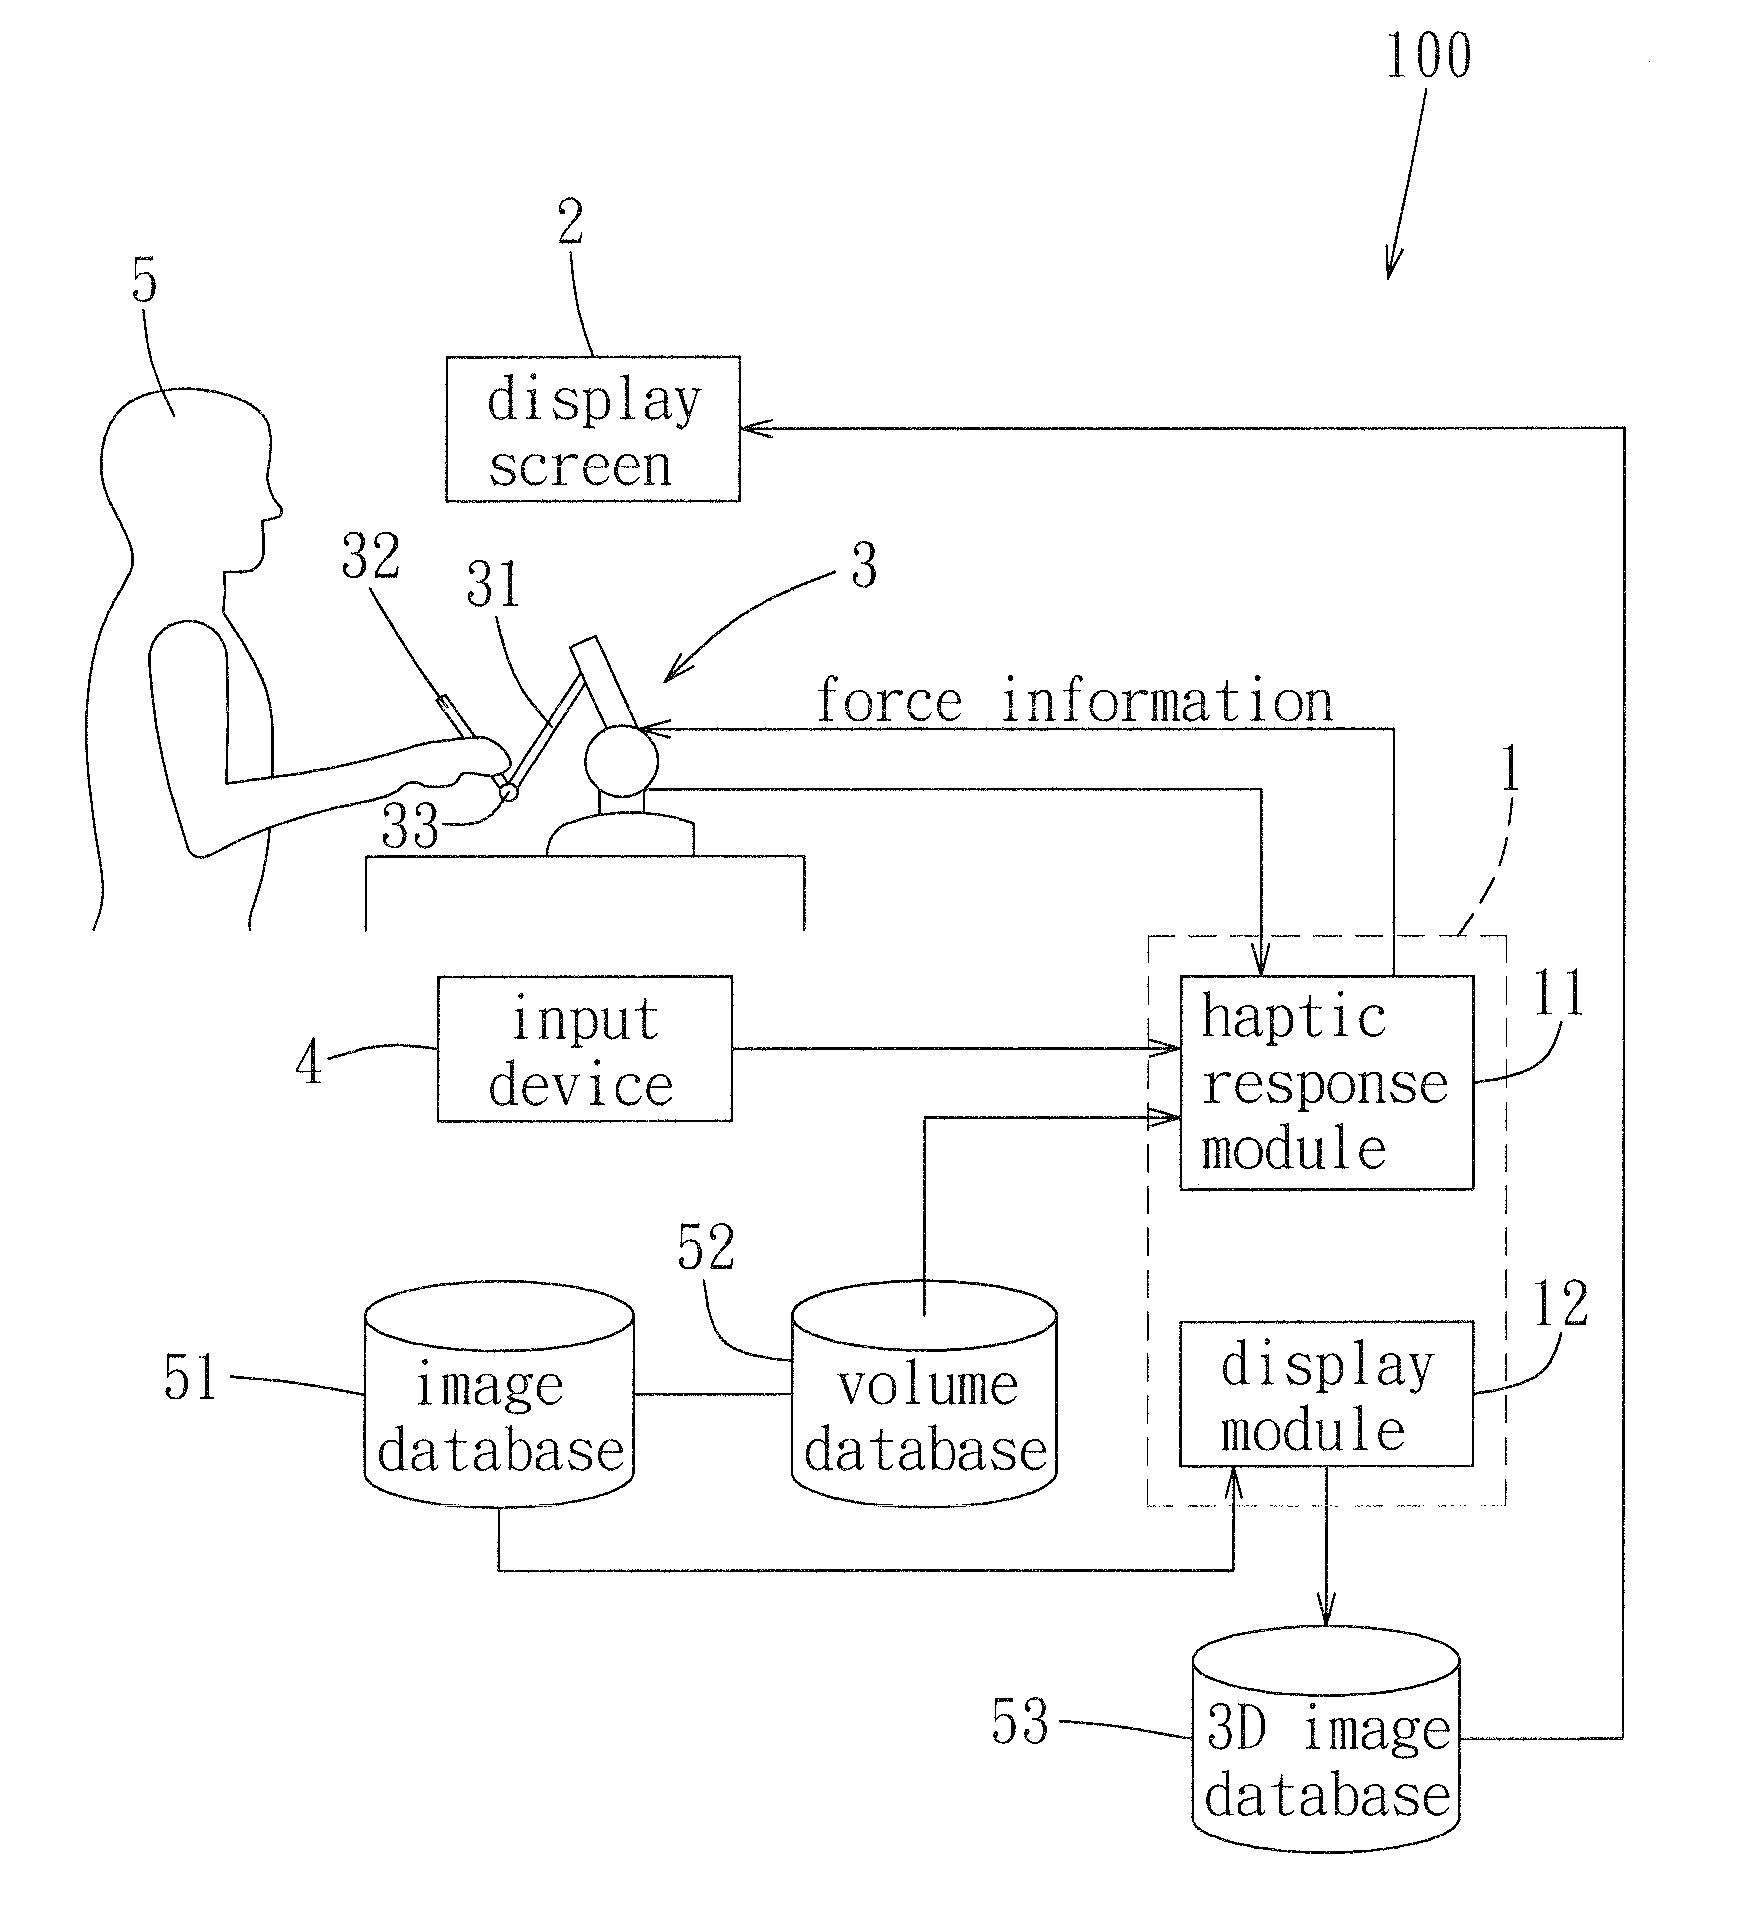 Method for Generating Real-Time Haptic Response Information for a Haptic Simulating Device